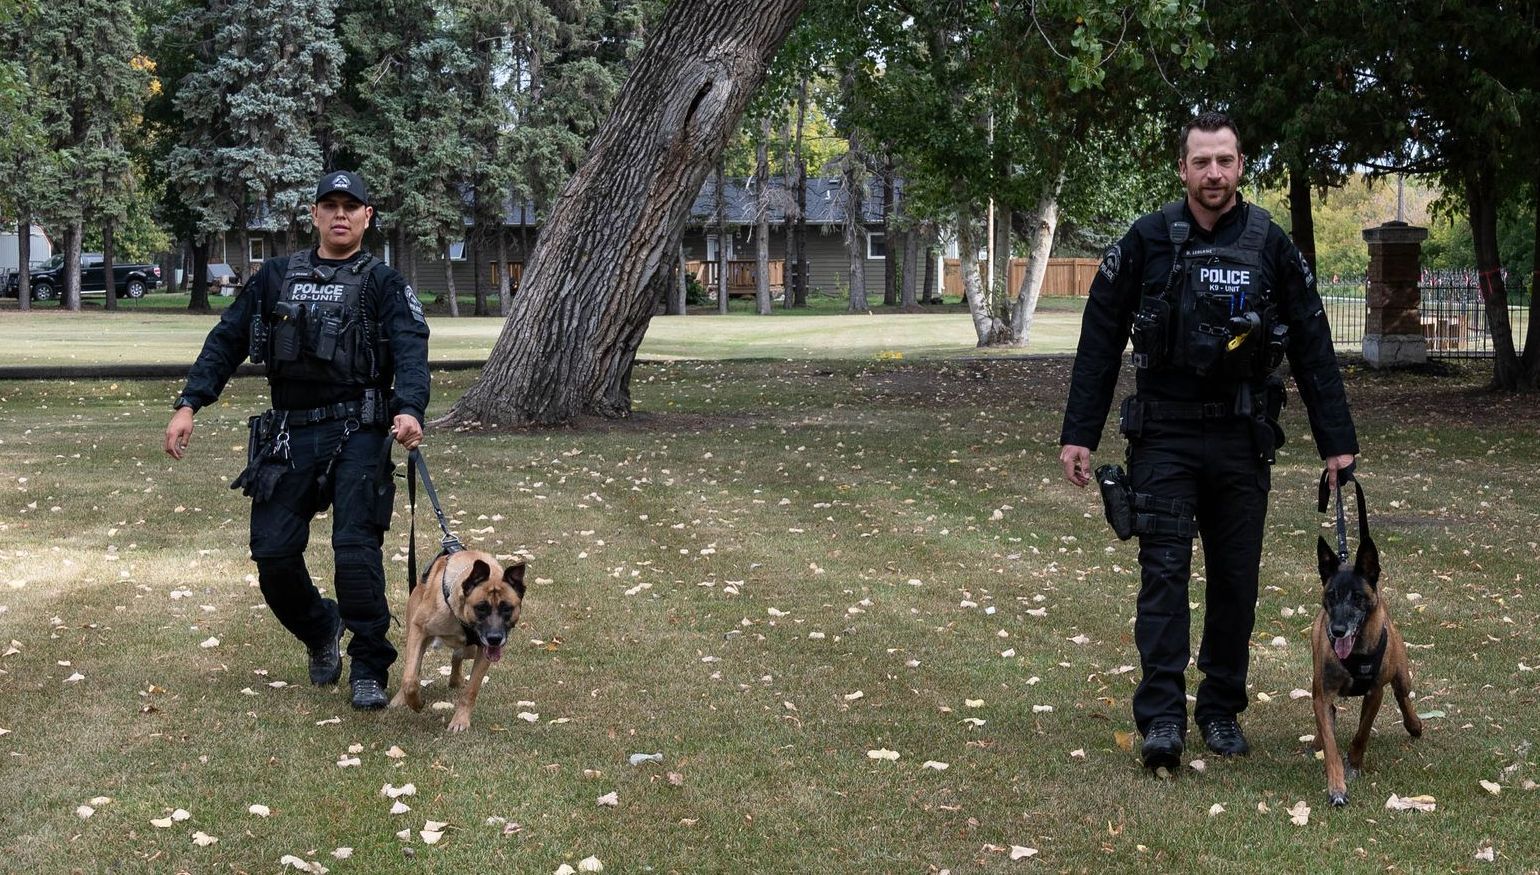 MFNPS-Manitoba First Nations Police Service - K9 Services Te